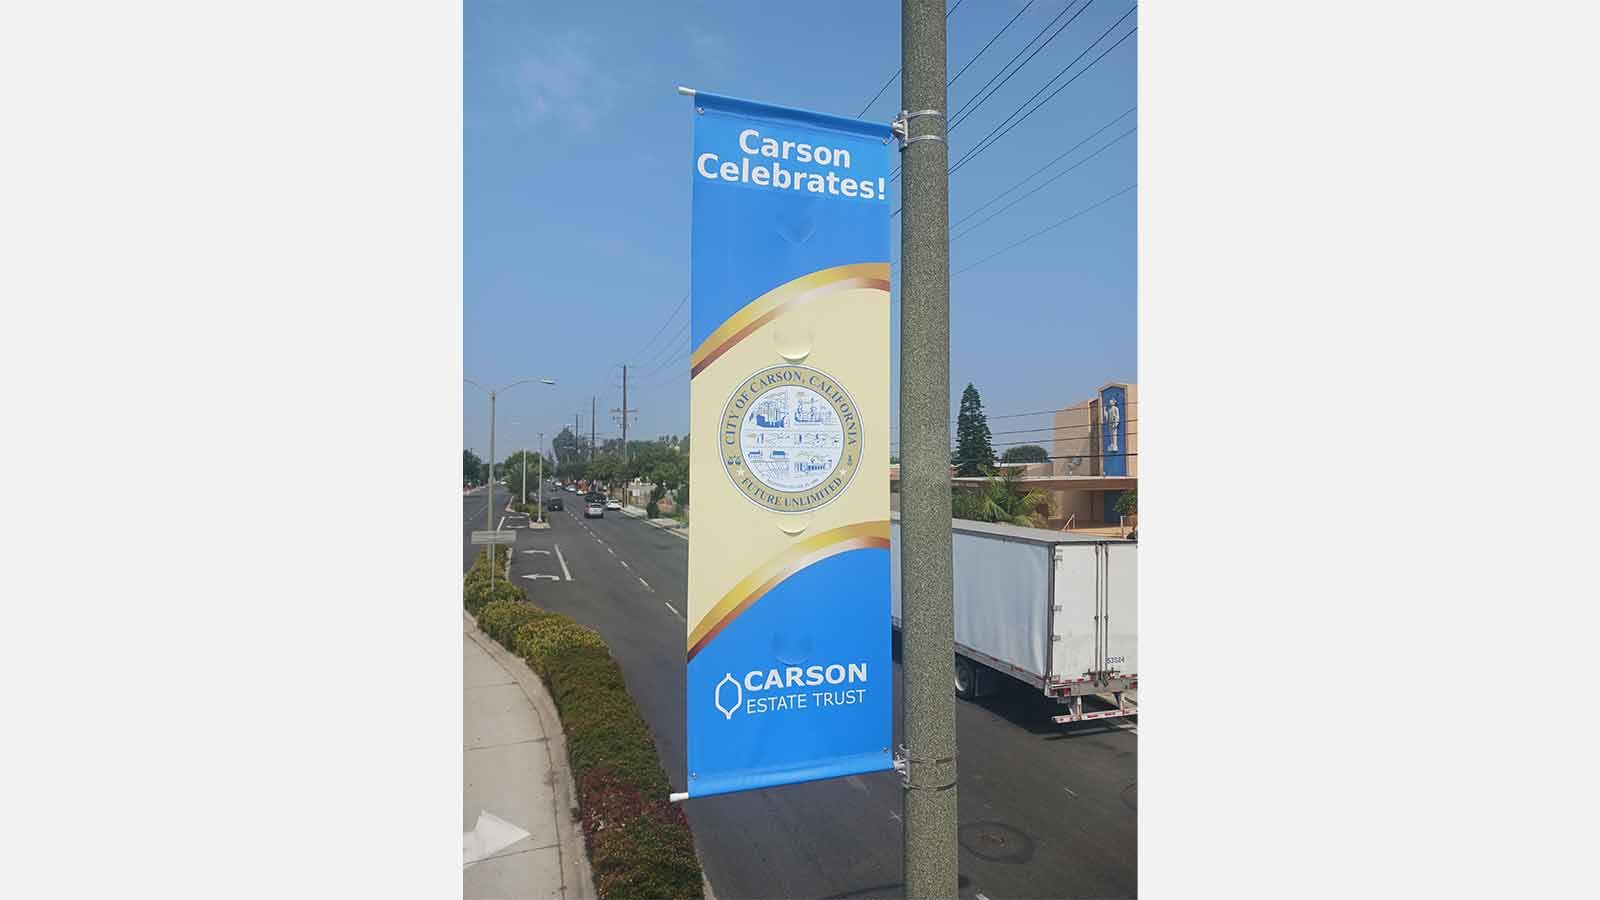 Carson Estate Trust banner installed outdoors